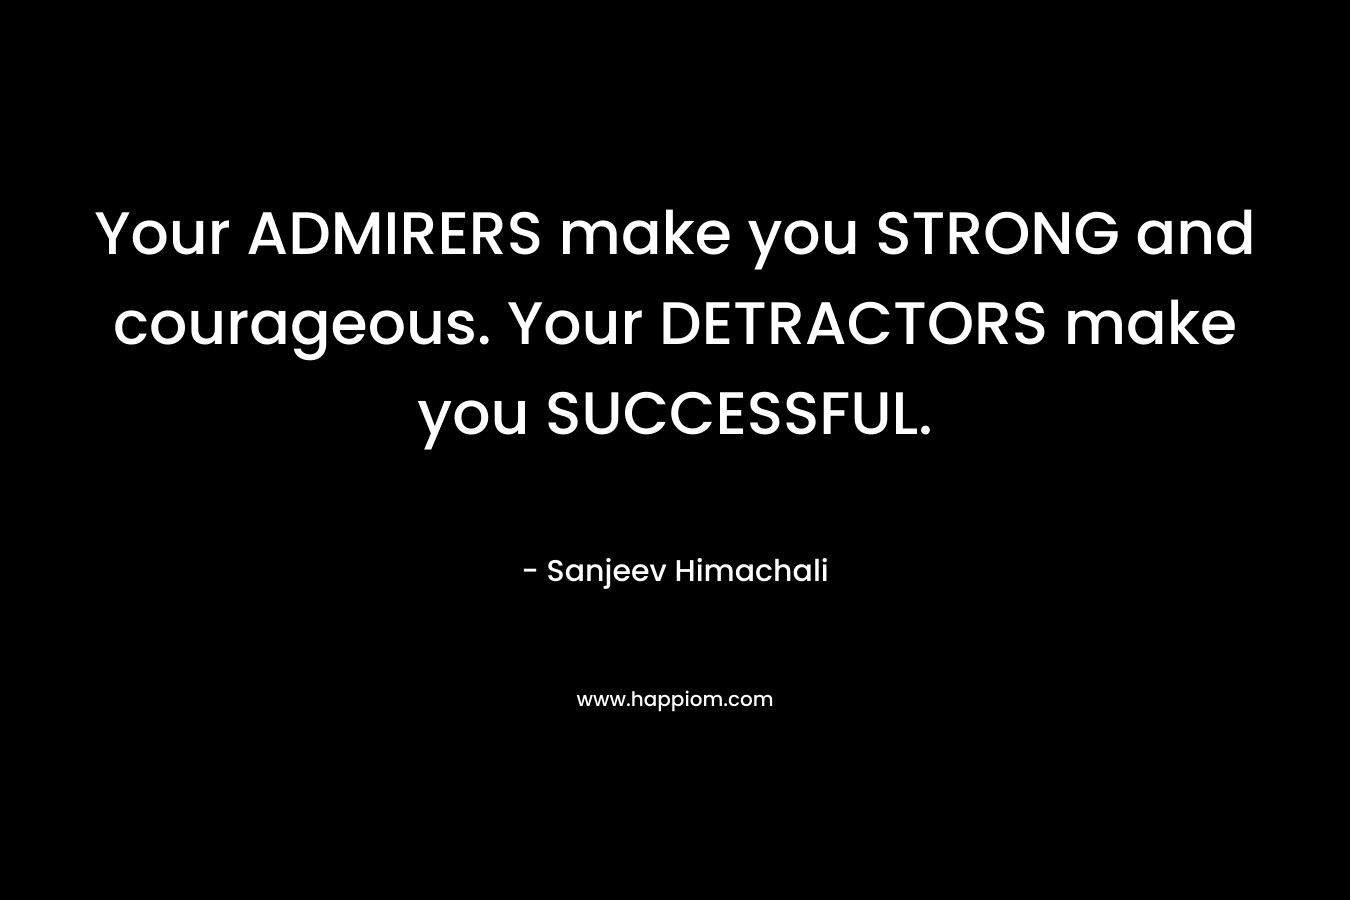 Your ADMIRERS make you STRONG and courageous. Your DETRACTORS make you SUCCESSFUL. – Sanjeev Himachali